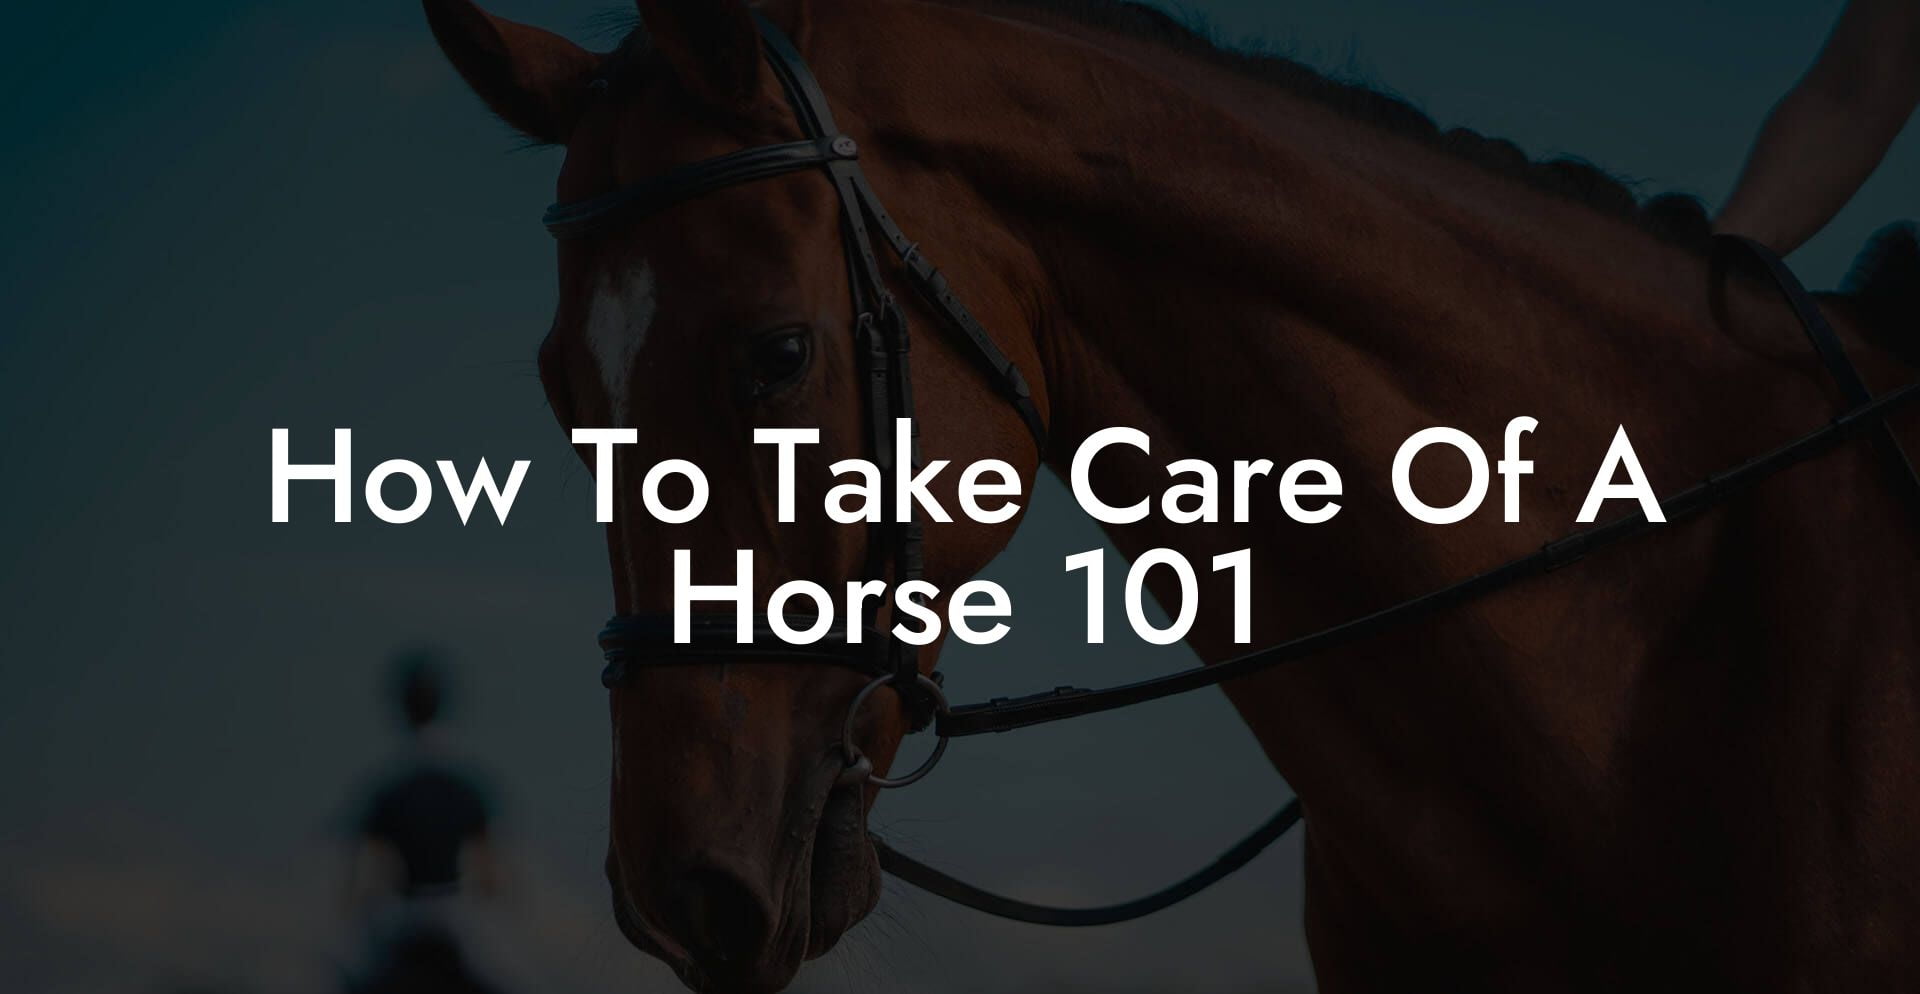 How To Take Care Of A Horse 101